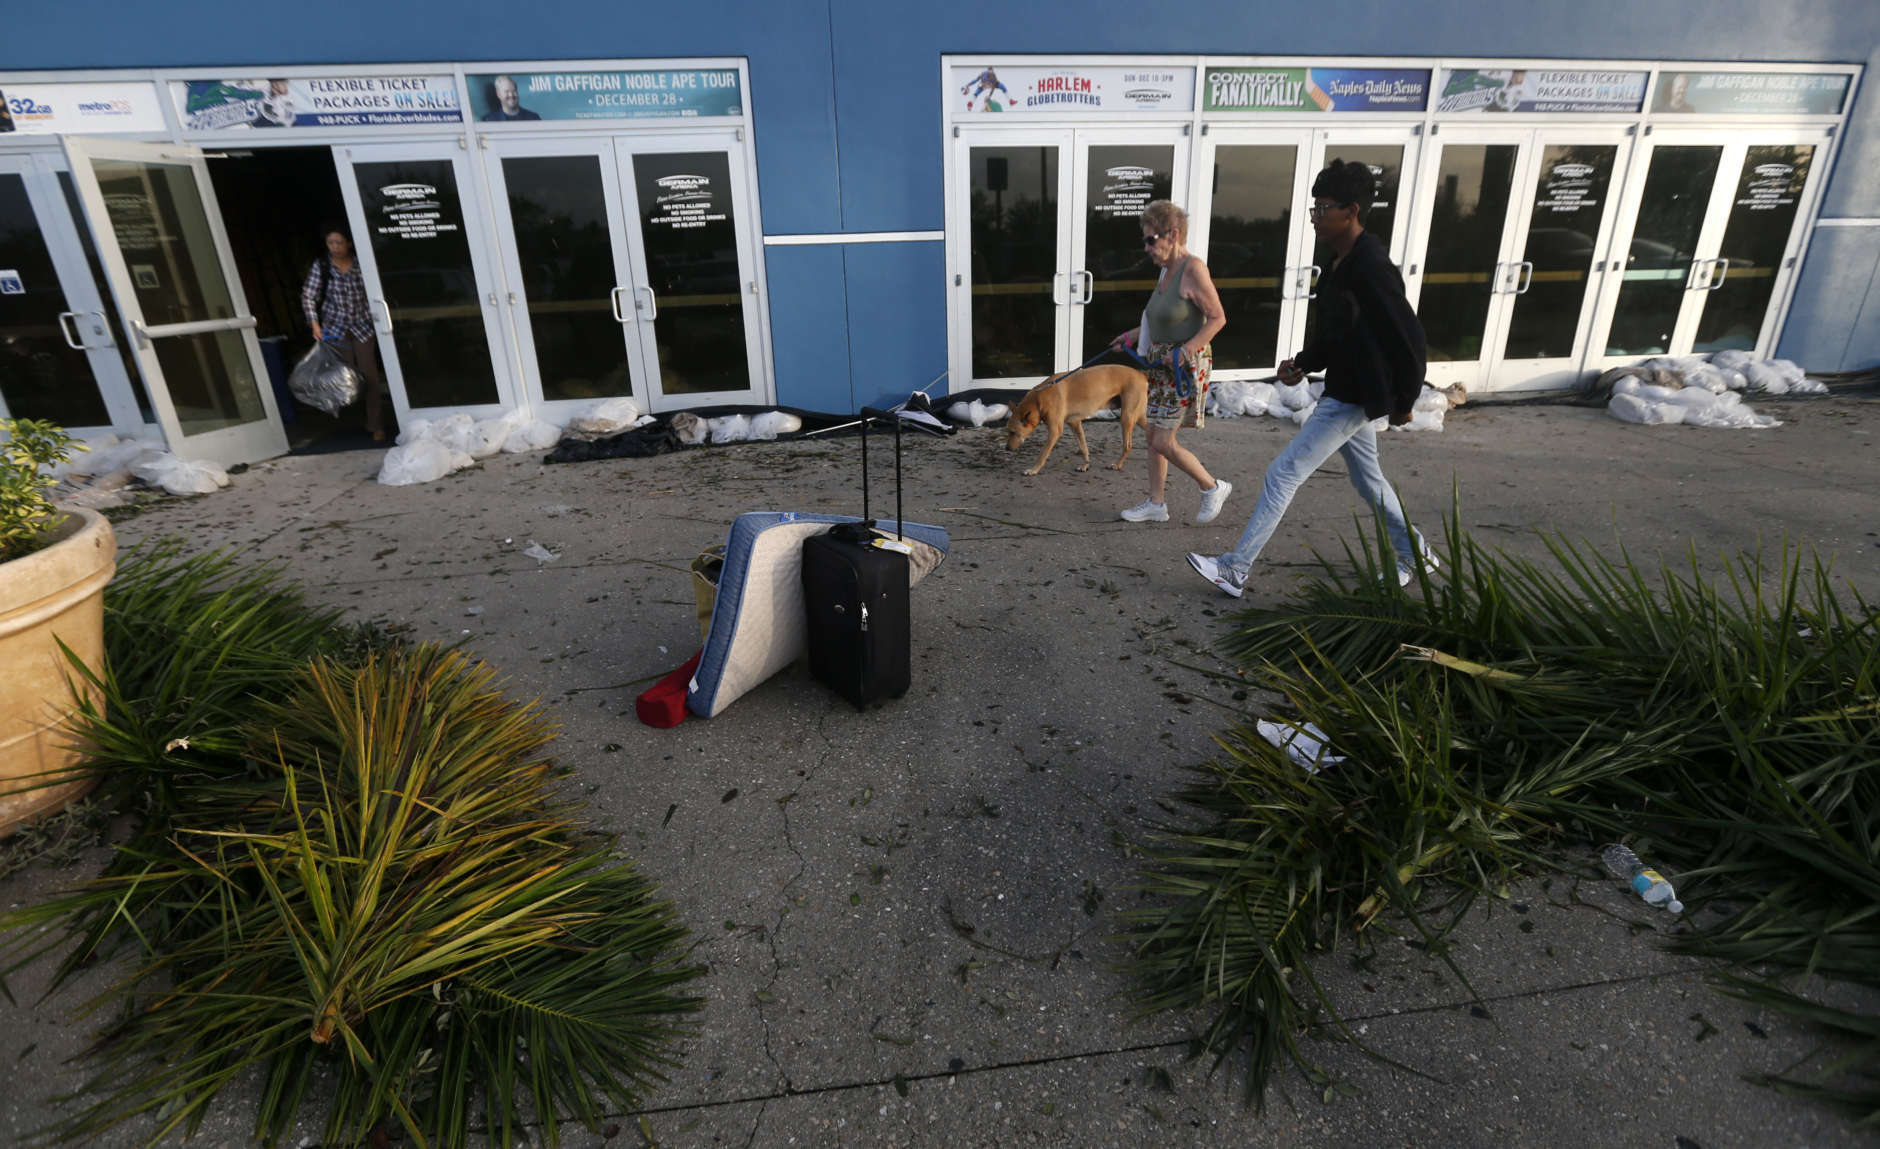 Evacuees leave the Germain Arena, which was used as an evacuation shelter for Hurricane Irma, which passed through yesterday, in Estero, Fla., Monday, Sept. 11, 2017. (AP Photo/Gerald Herbert)